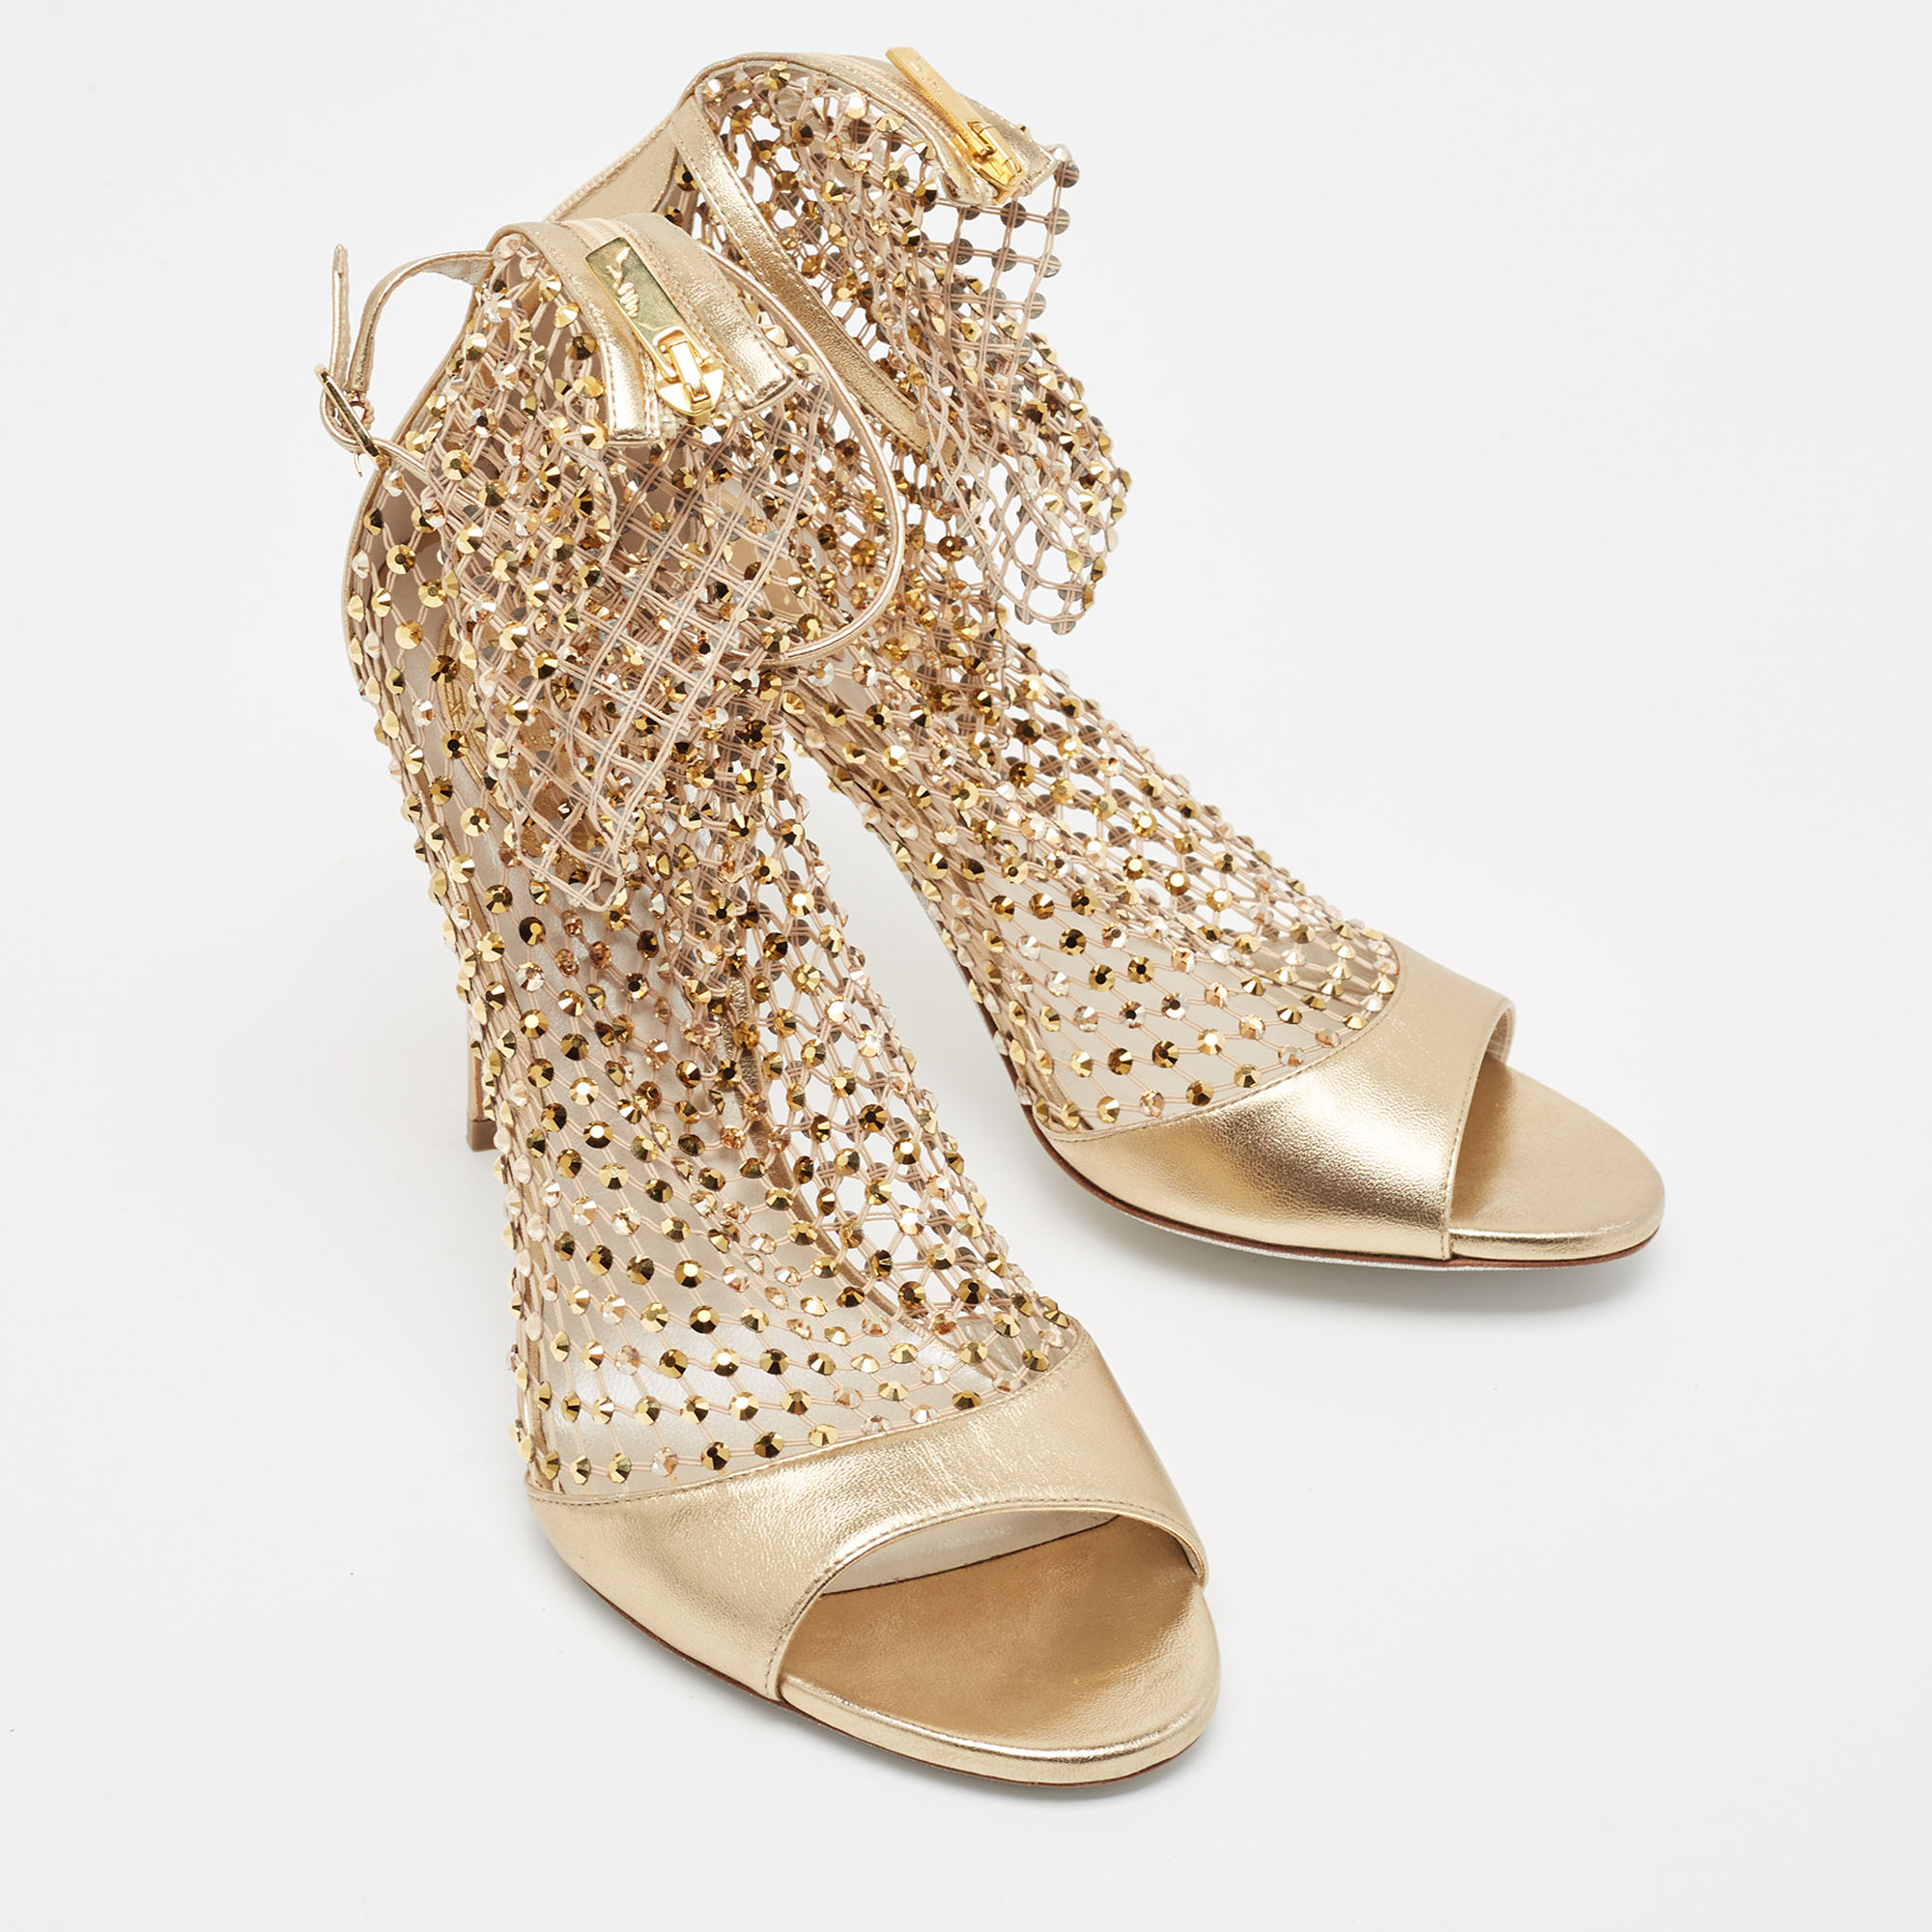 Rene Caovilla Lace And Leather Crystal Embellished Galaxia Sandals Size 40